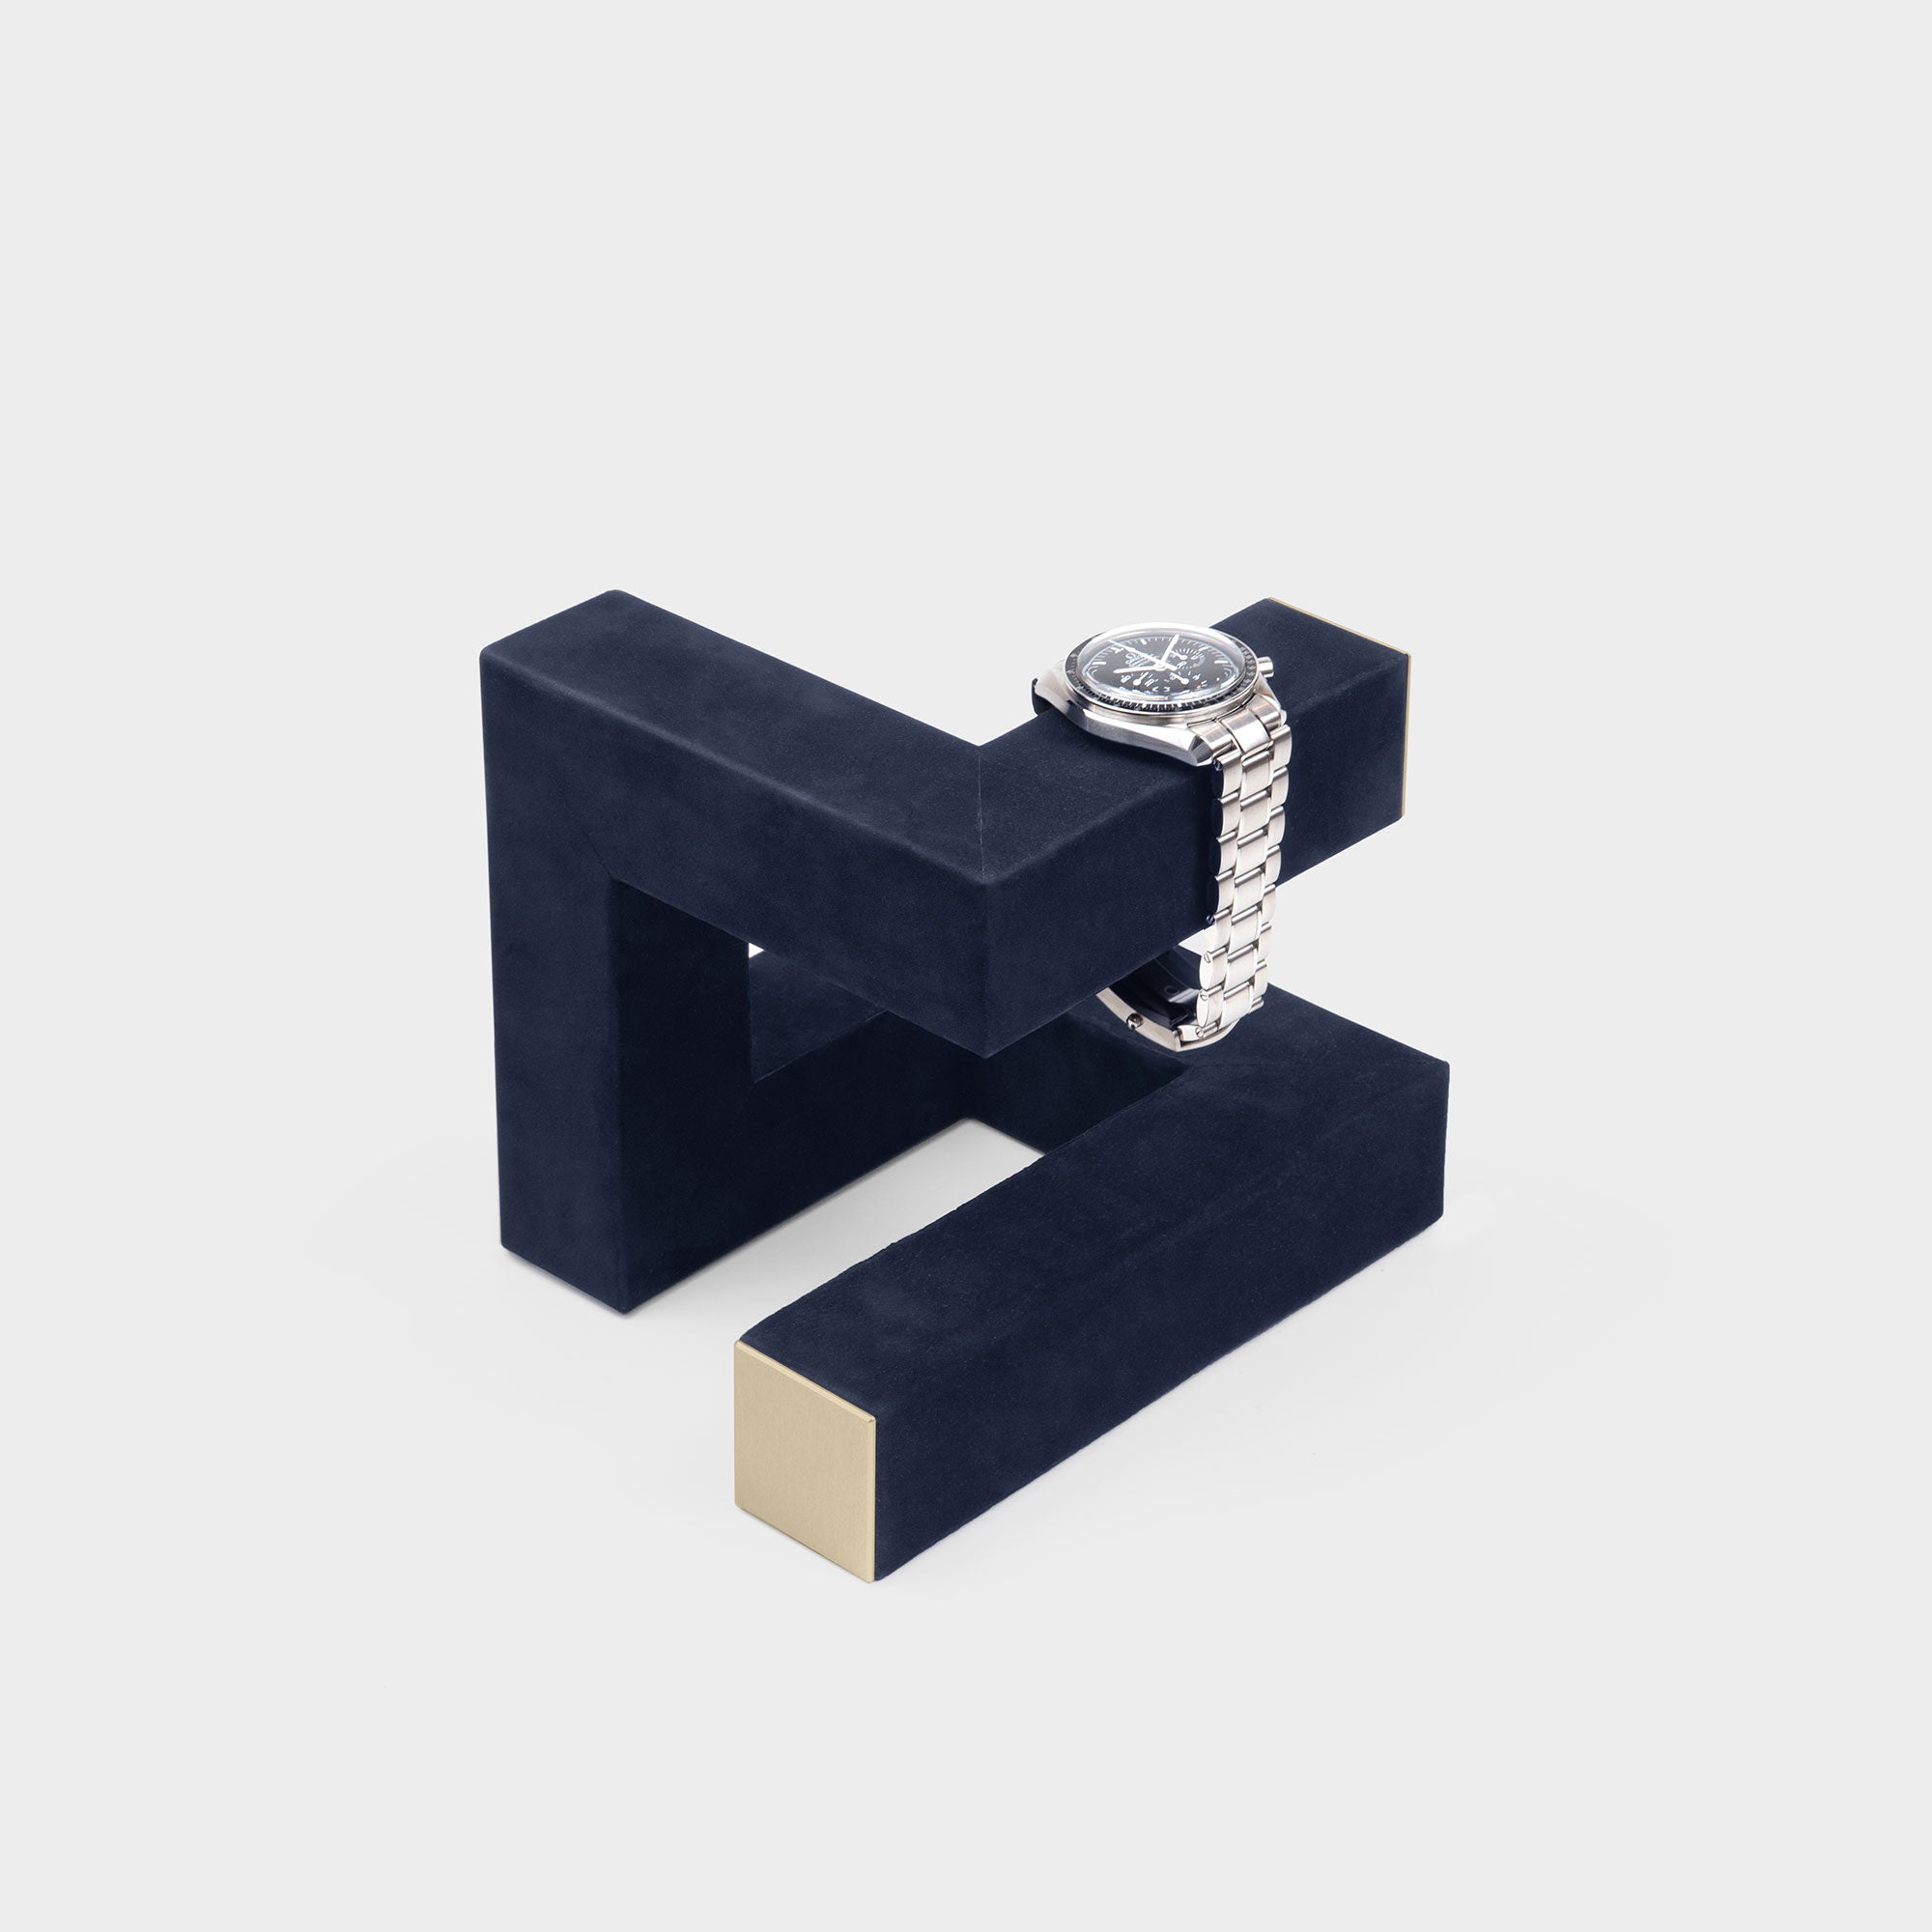 Hudson 3 Watch stand in gold and navy showcasing luxury watches